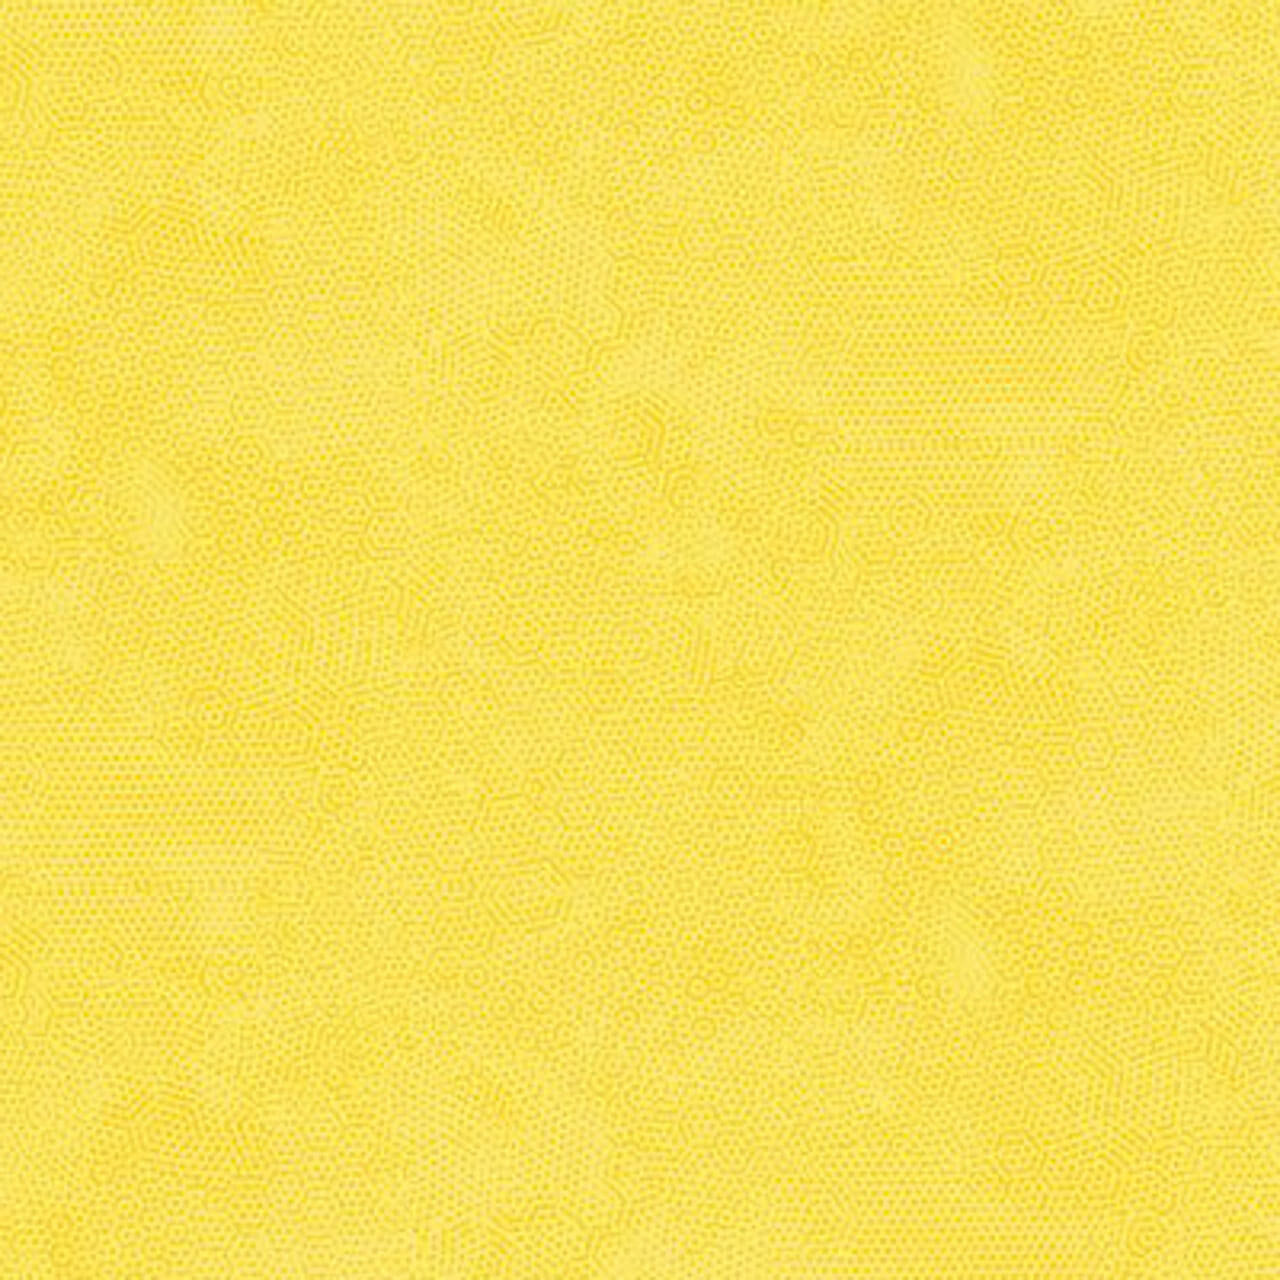 Fabric Sample of Andover Fabrics Dimples Collection in Sunny